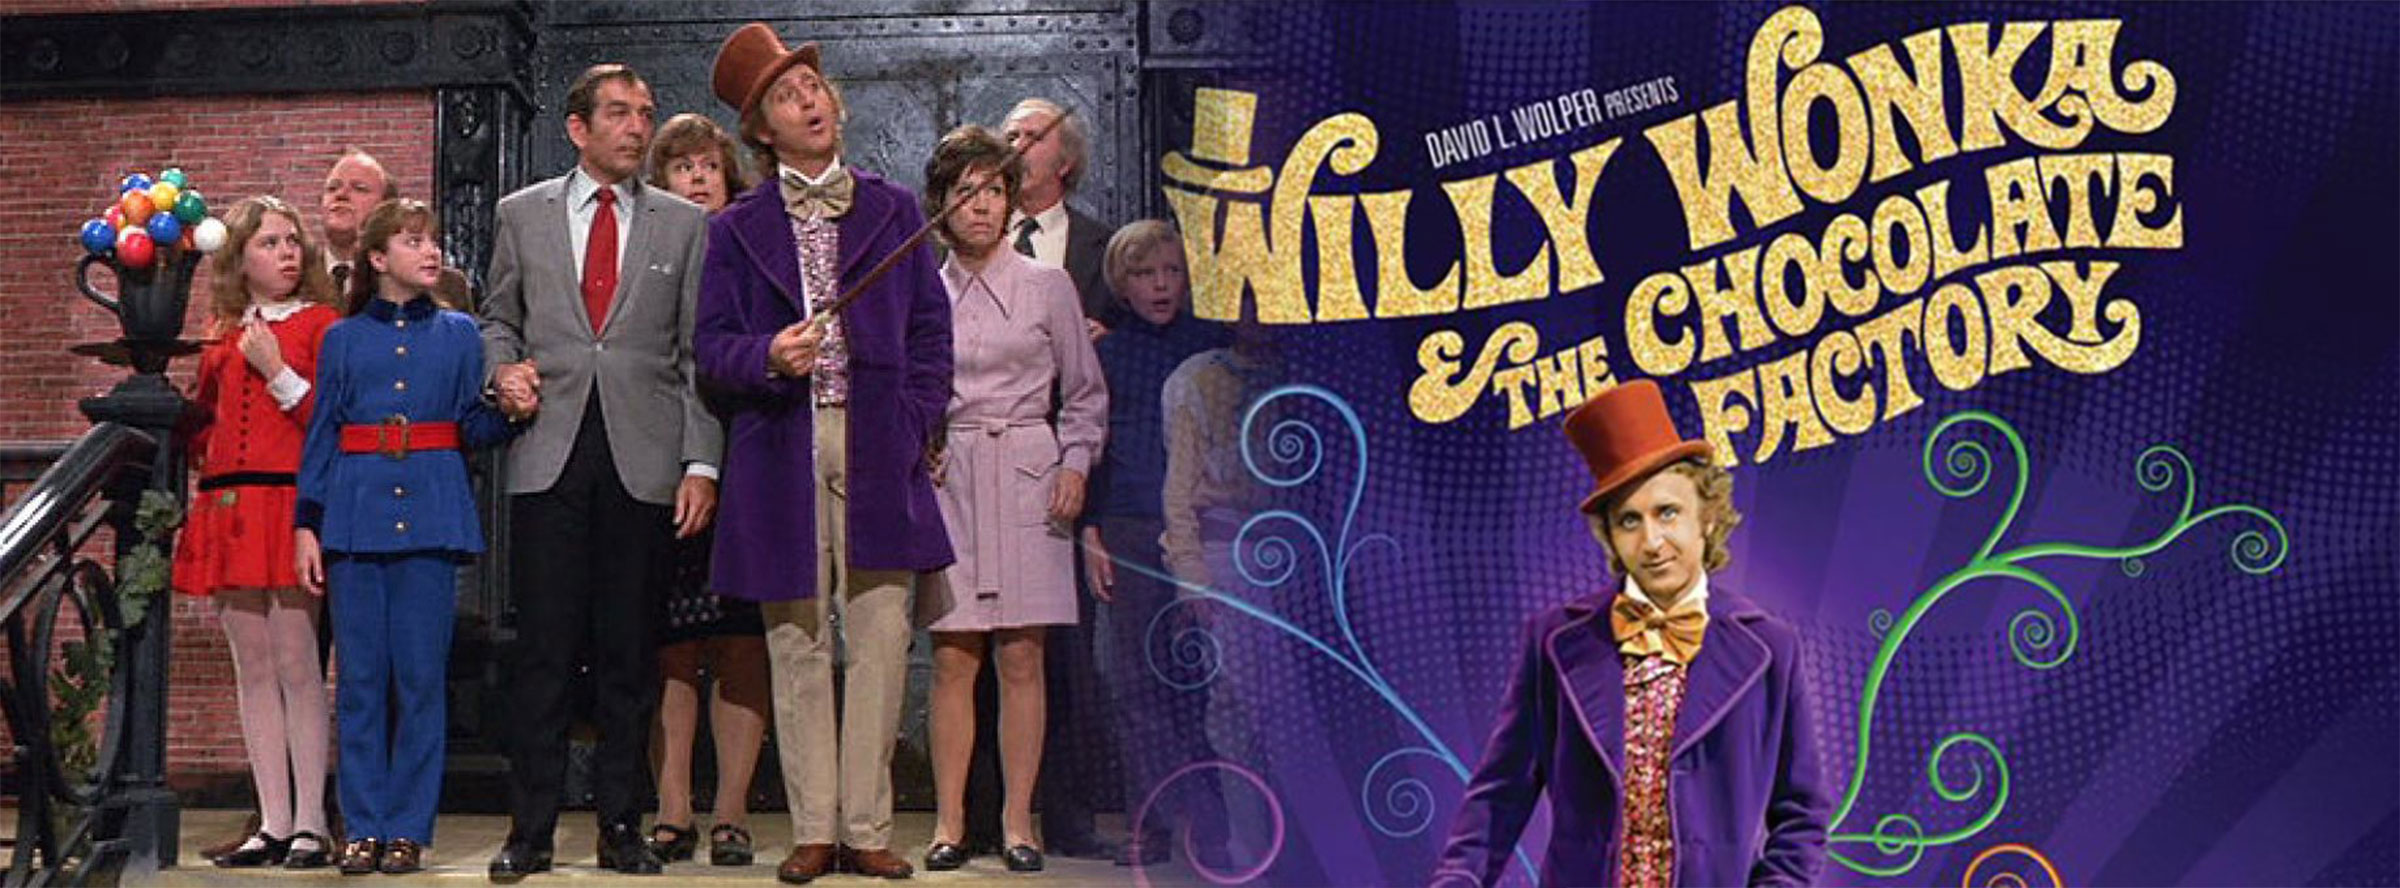 Slider Image for Willy Wonka & the Chocolate Factory 50th Anniversa